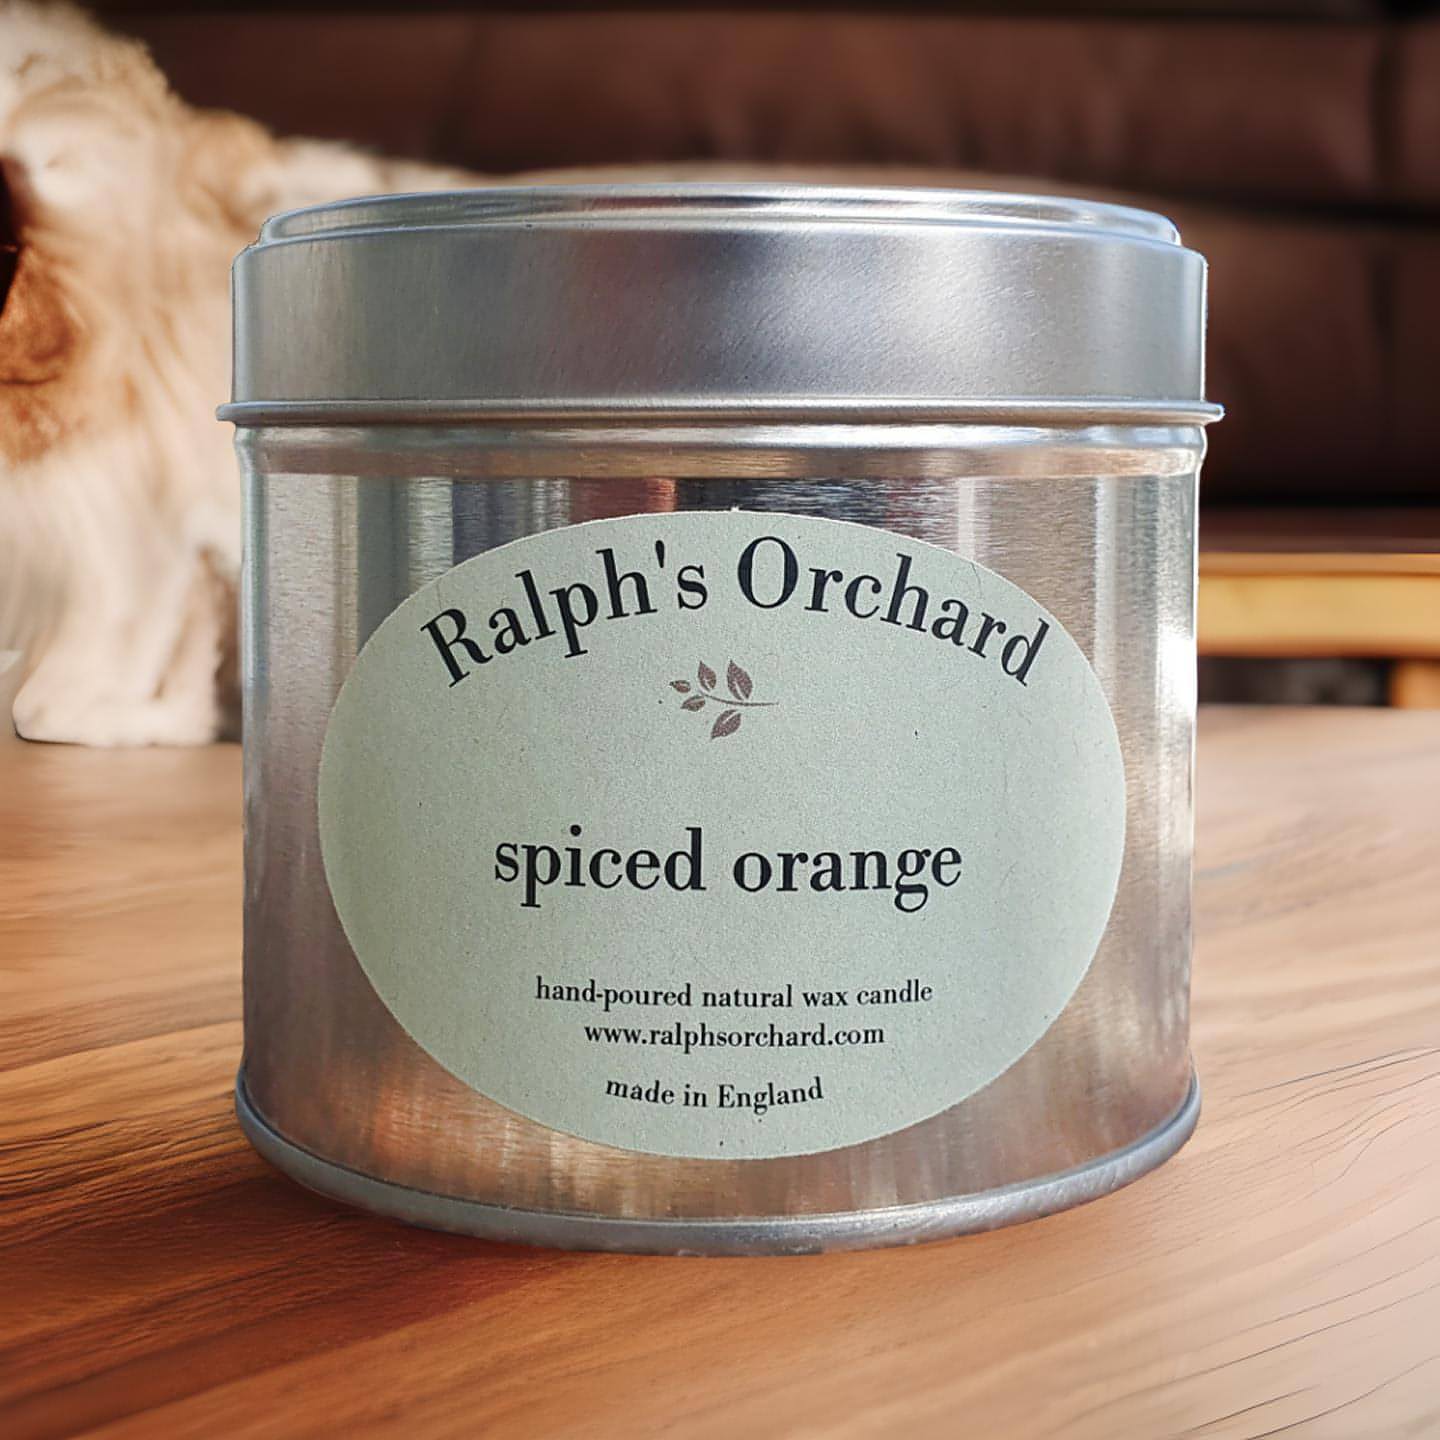 Spiced Orange Scented Candle